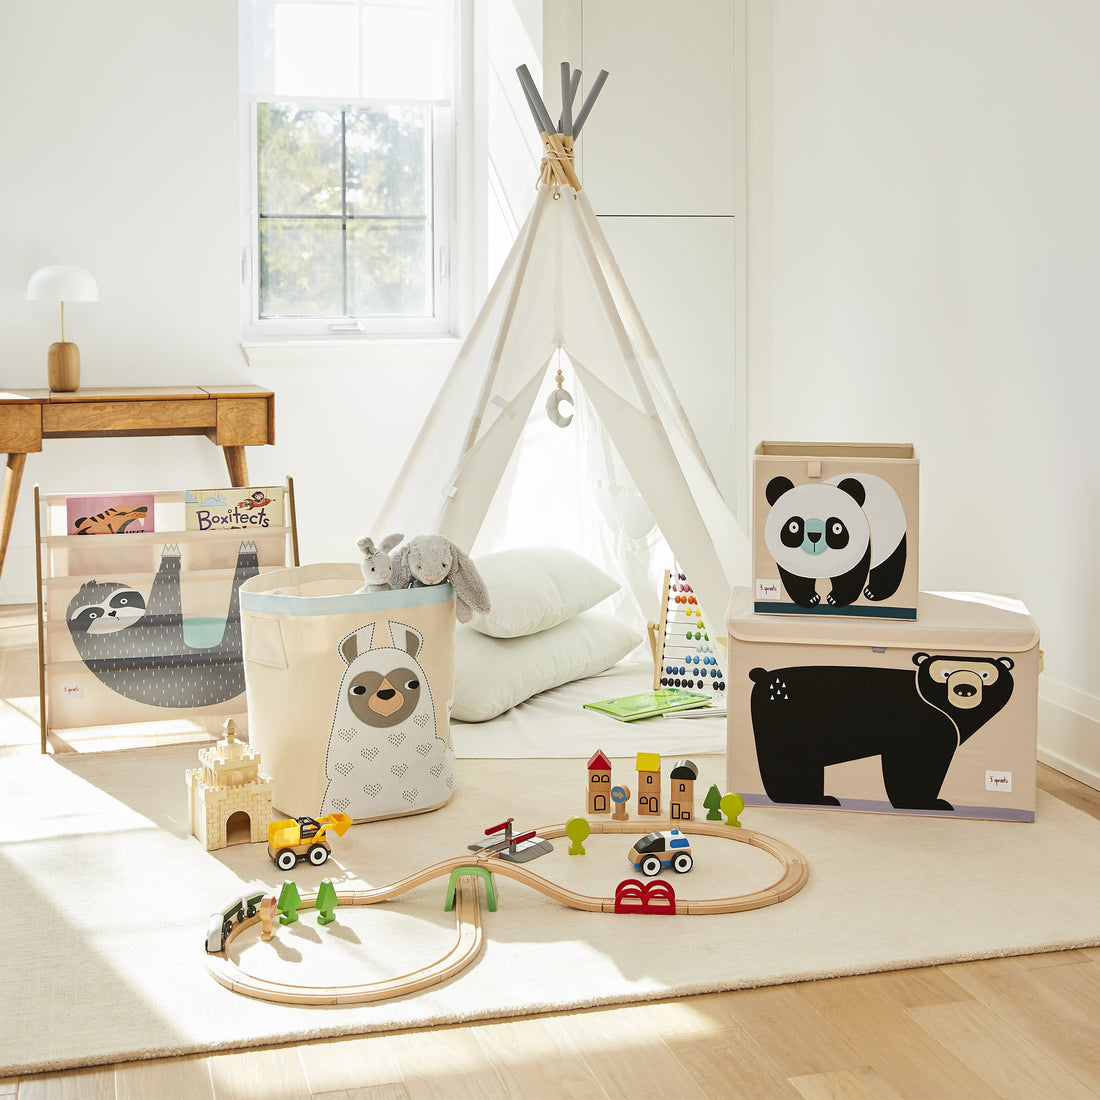 3 Sprouts Sloth Book Rack